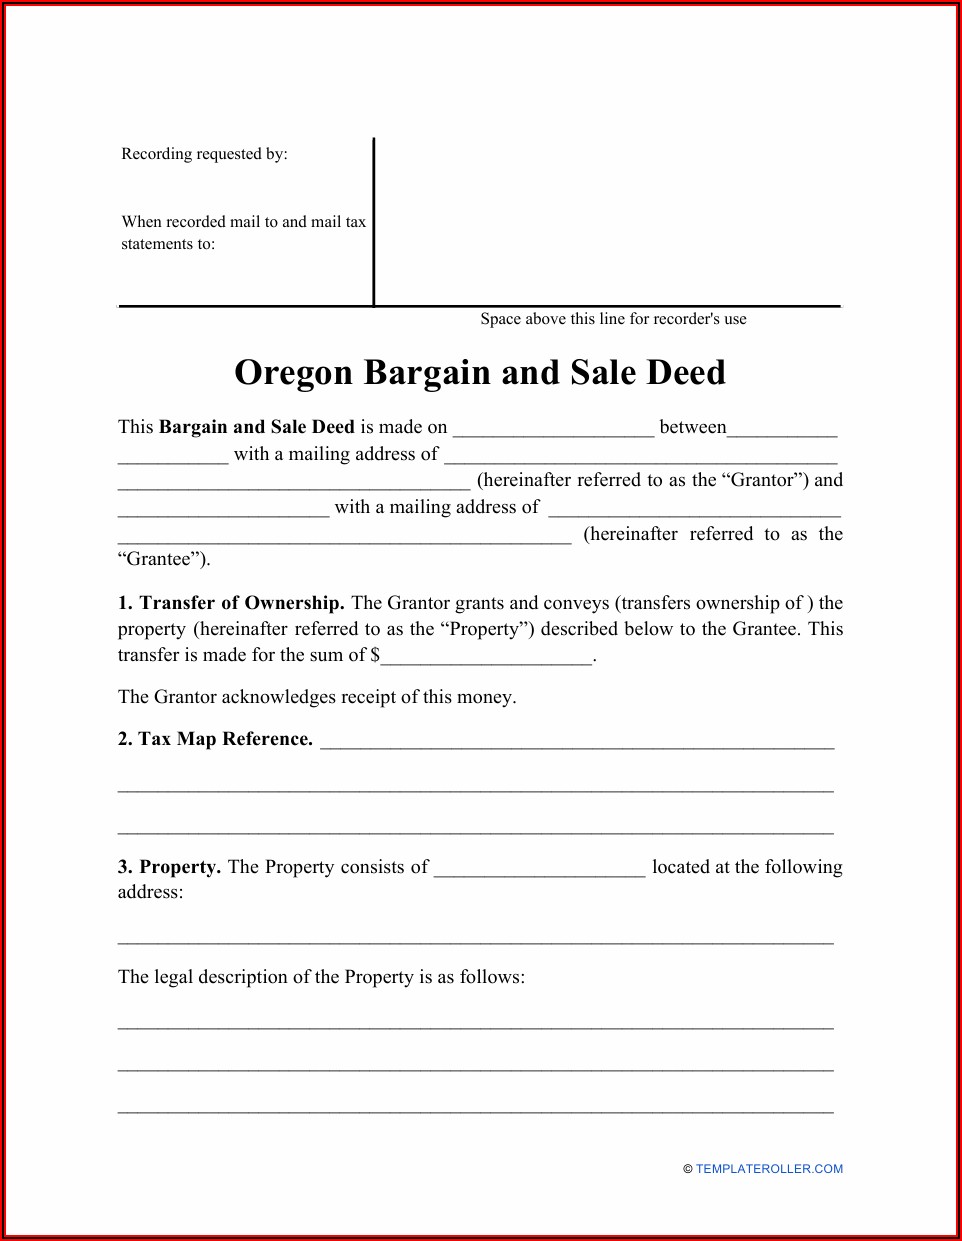 Bargain And Sale Deed Form Oregon